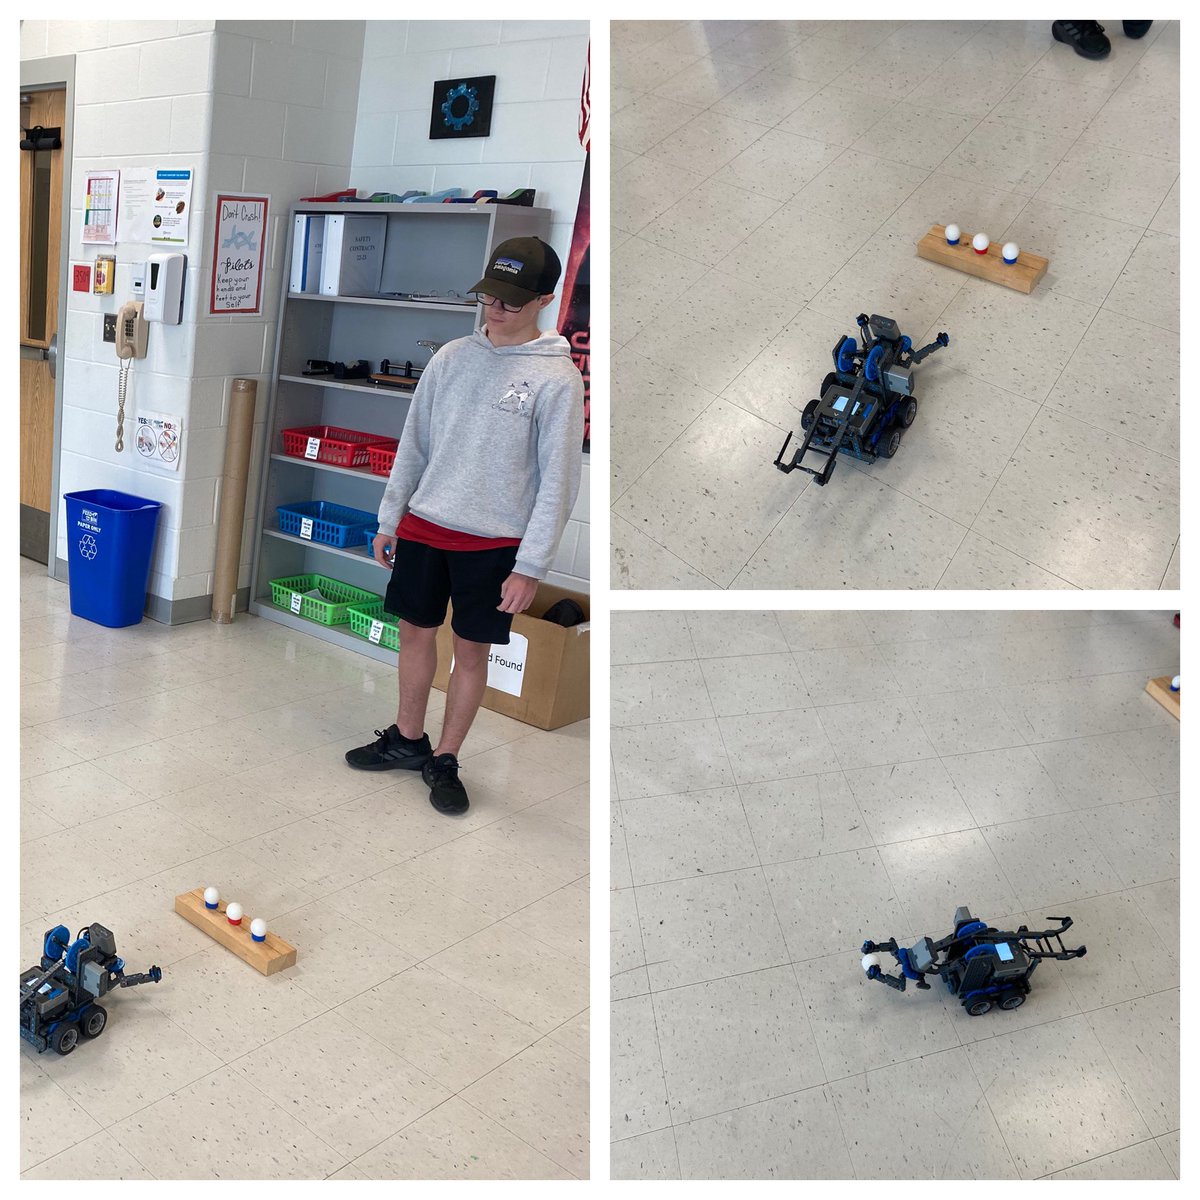 7th grade students are learning to build, code, and operate Vex Robots in Mr. Ferrell’s Engineering class!!! Quite impressive…and lots of fun to watch!!! Great job Pilots!!